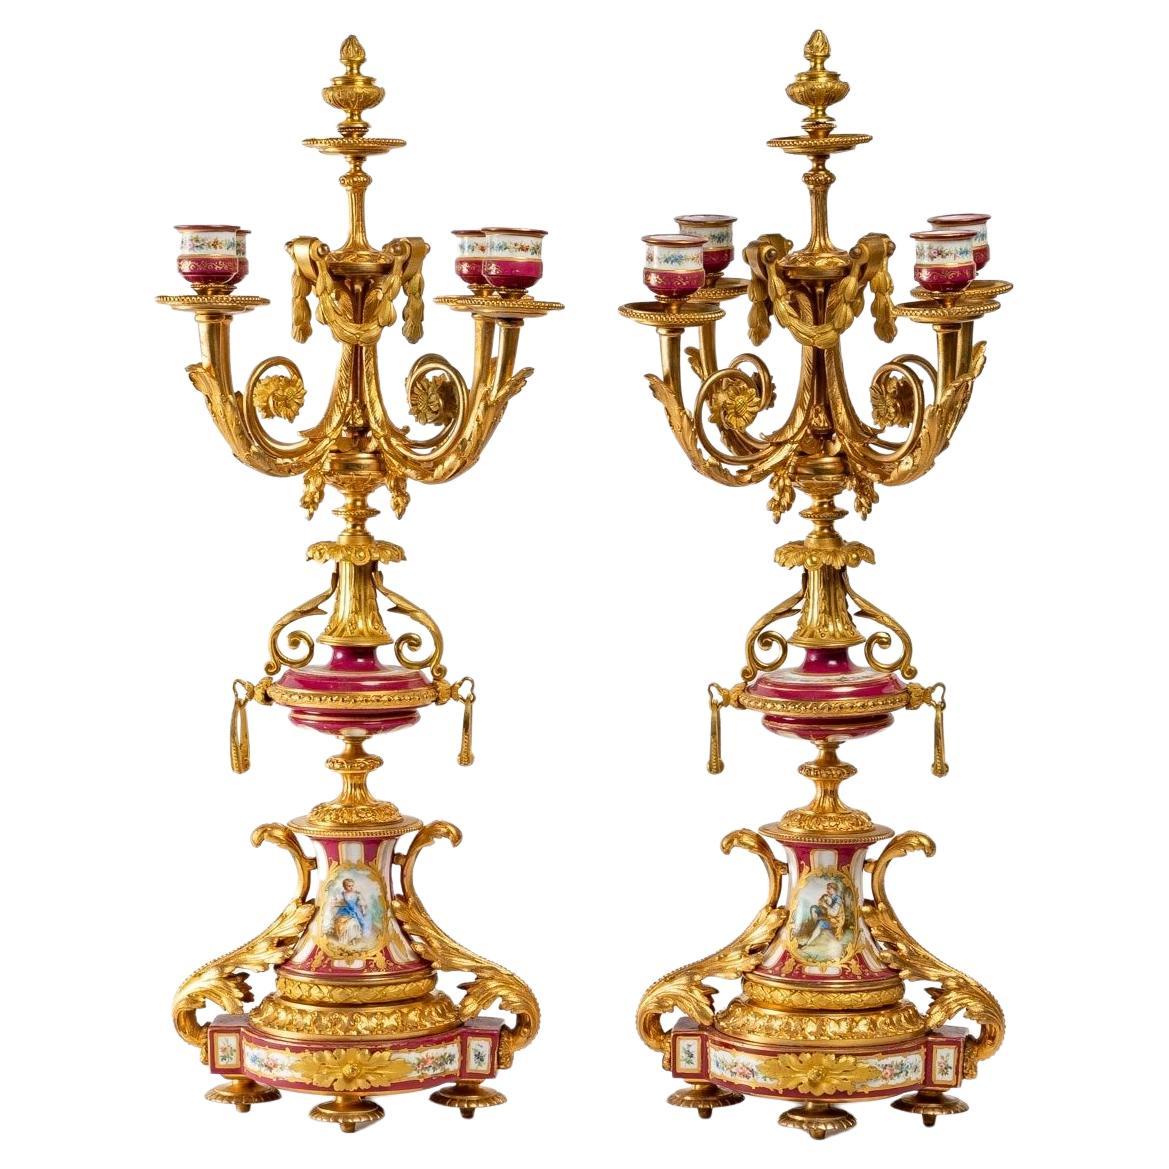 Pair of Candelabras in Gilt Bronze and Sèvres Porcelain End 19th Century